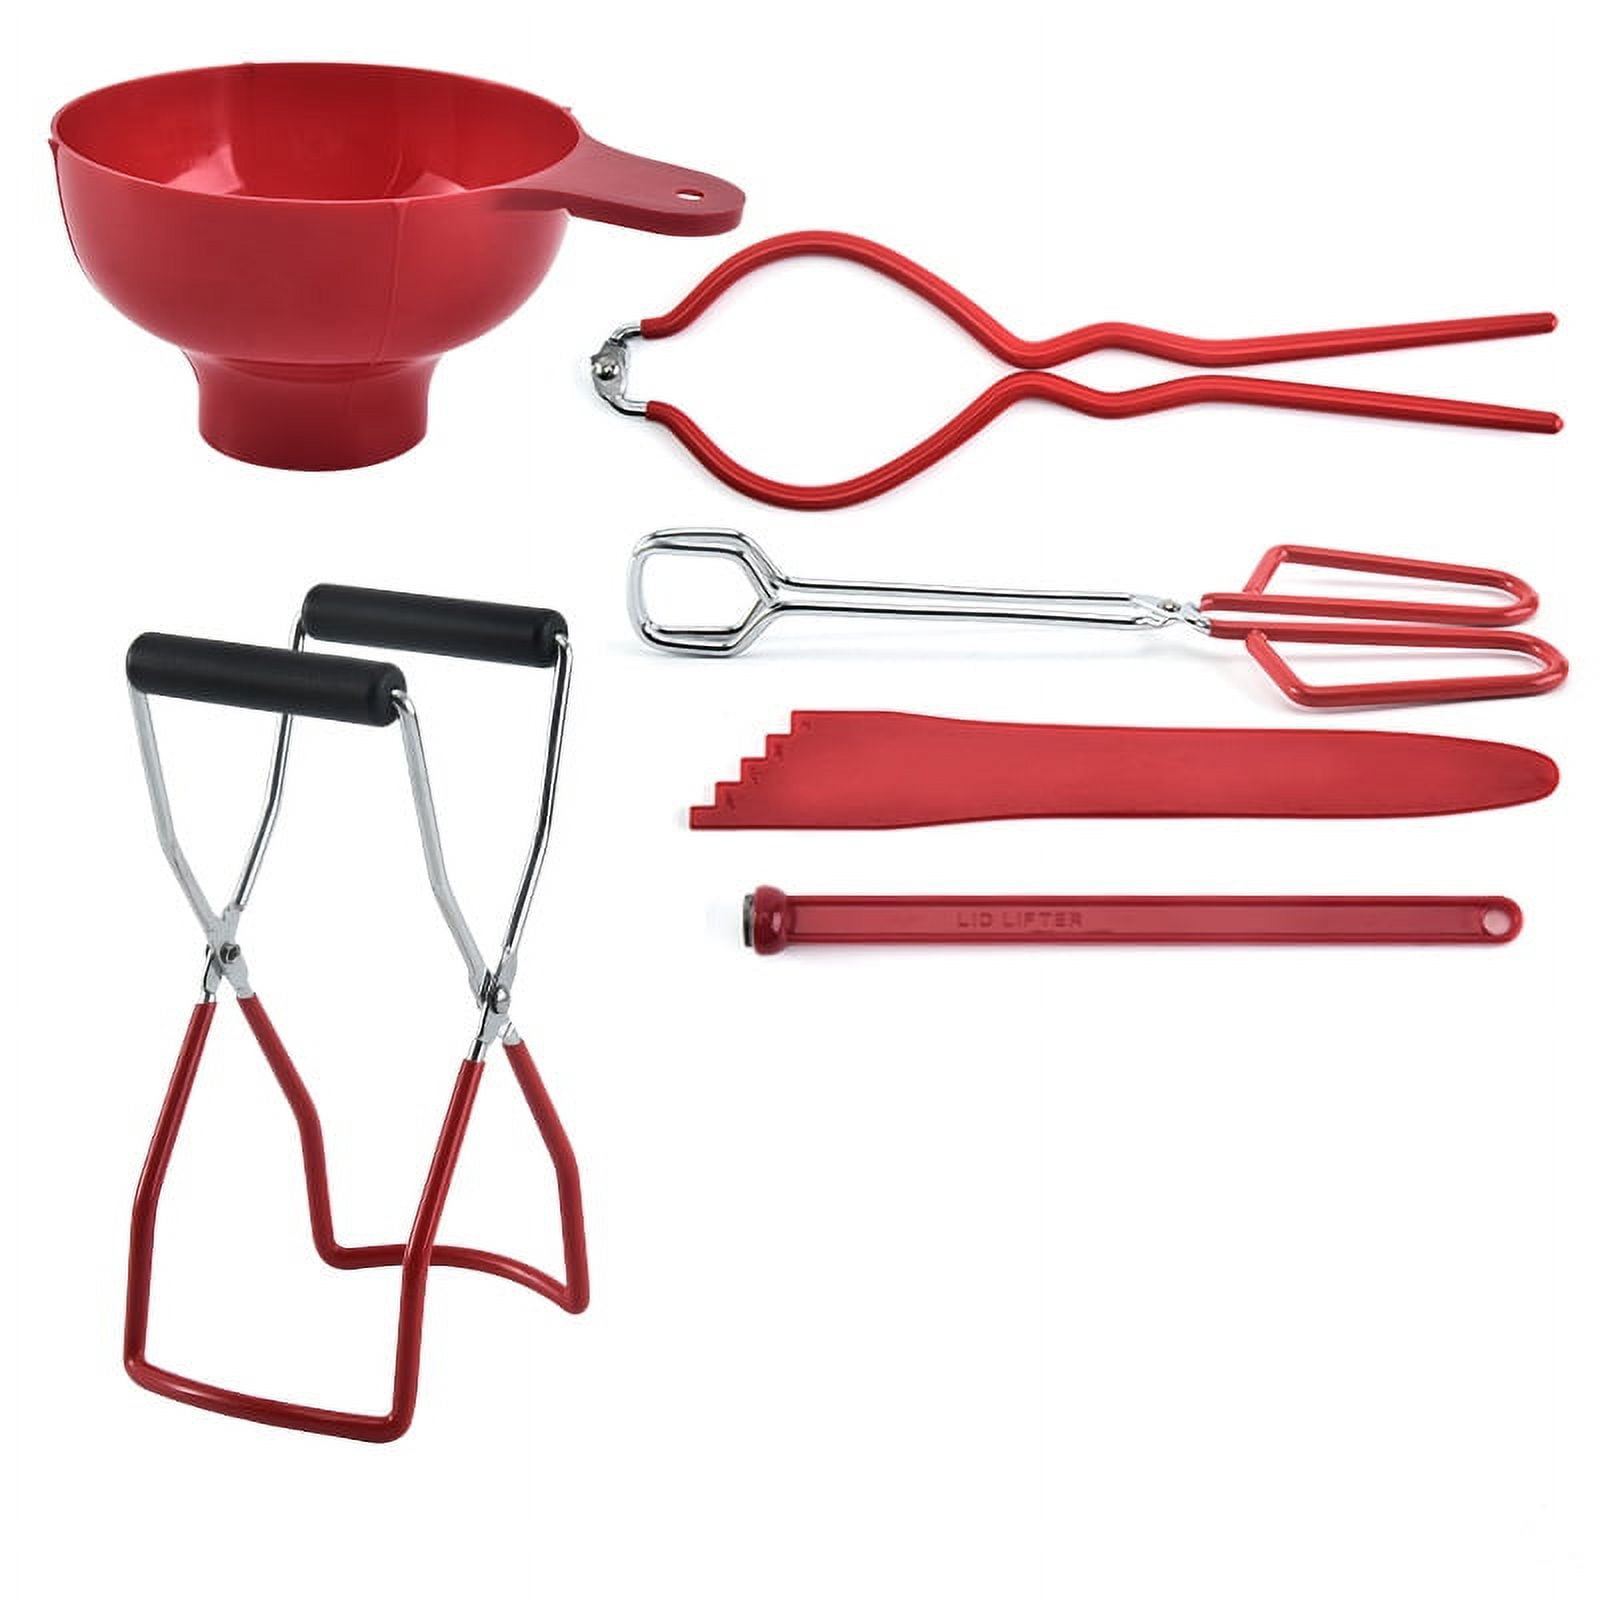 Canning Supplies Starter Kit - 6 Piece Canning Tools Set with Wide